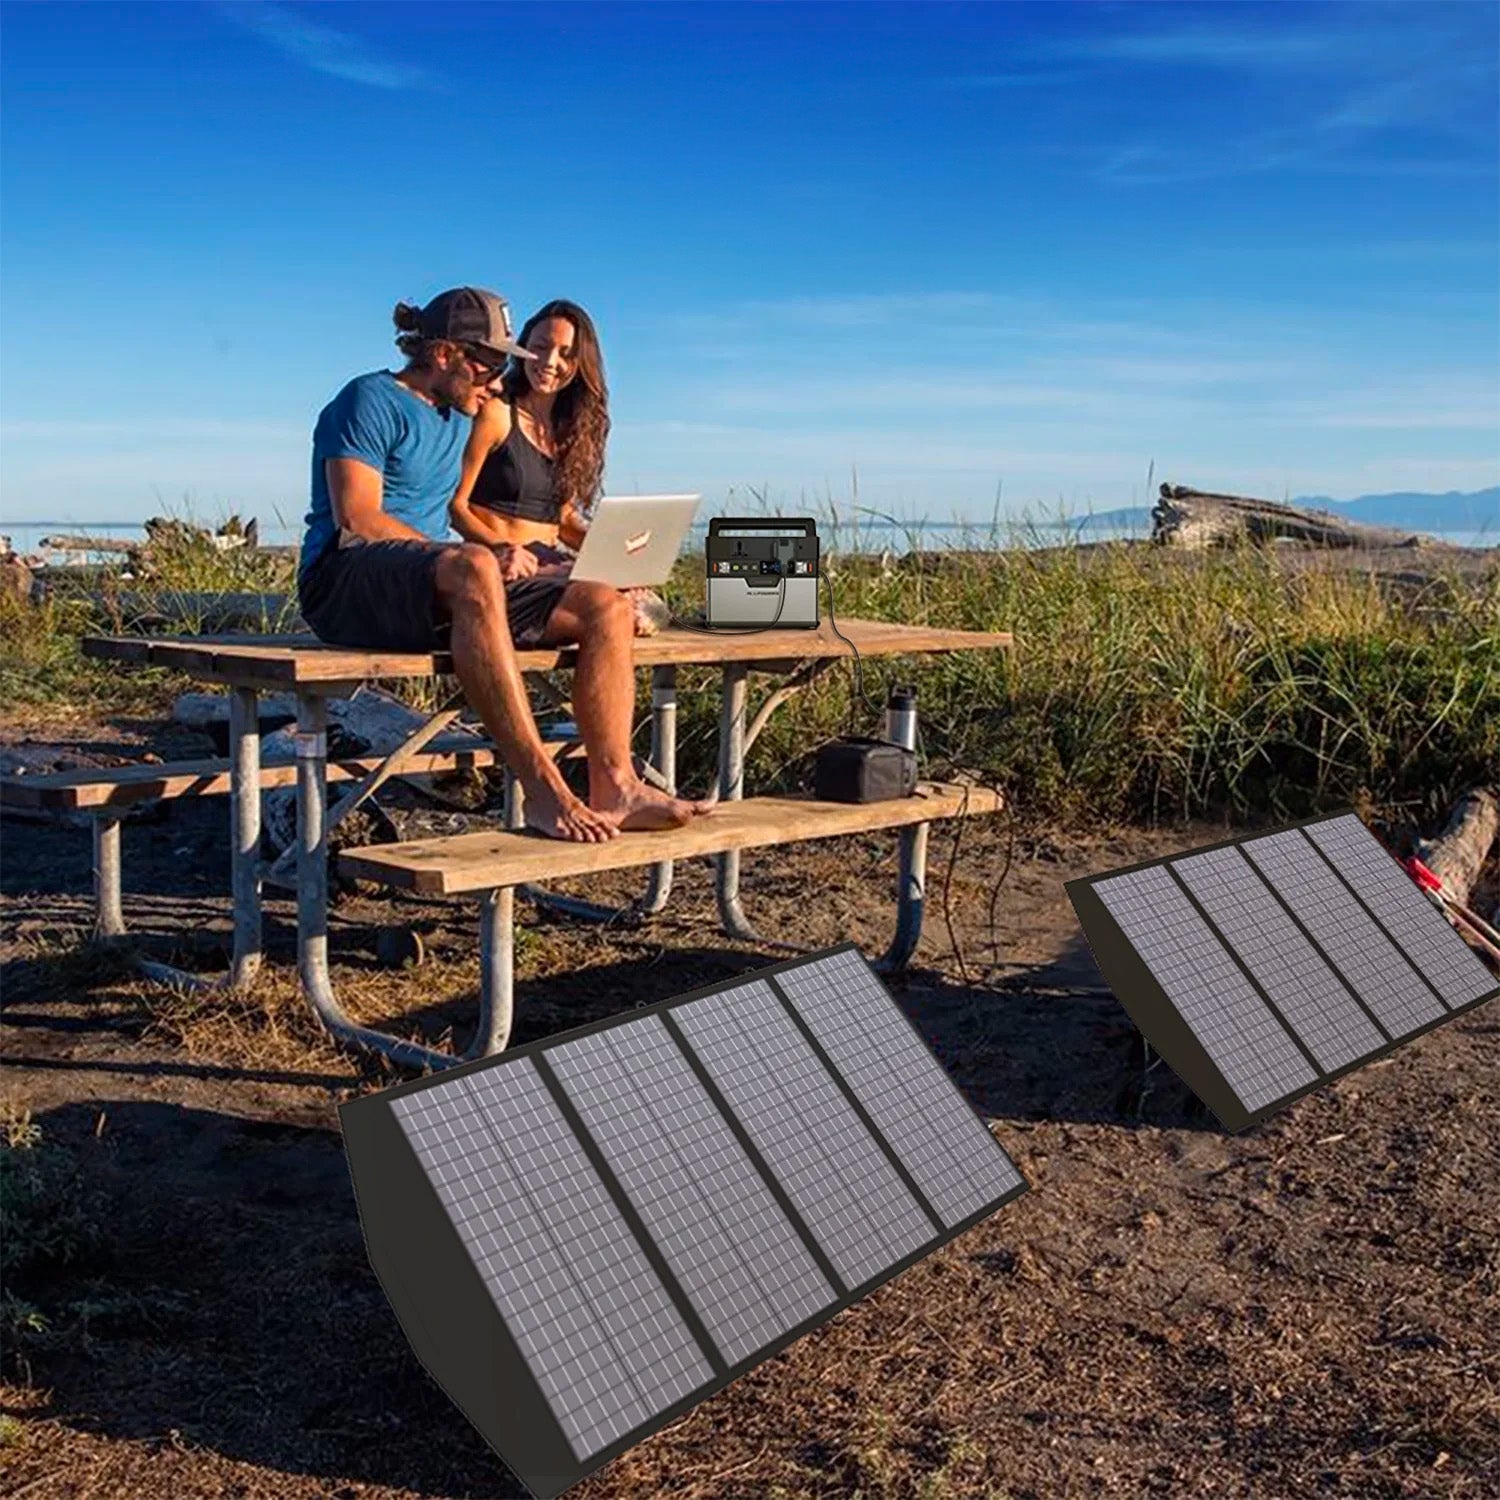 Portable solar panels at use for camping